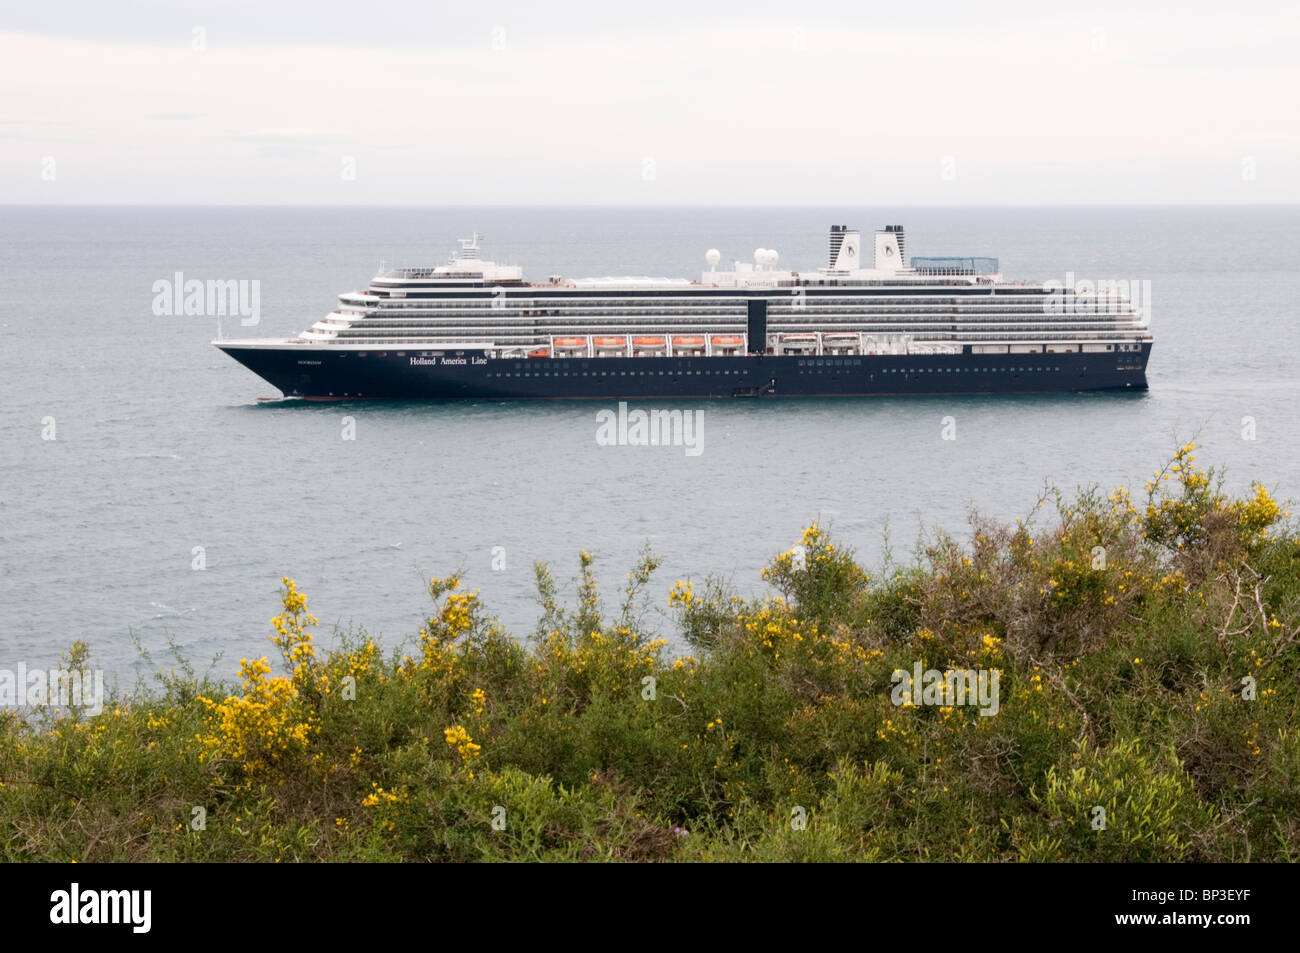 Holland America line's MS Noordam passenger cruise liner in the Mediterranean off of the south coast of France Stock Photo